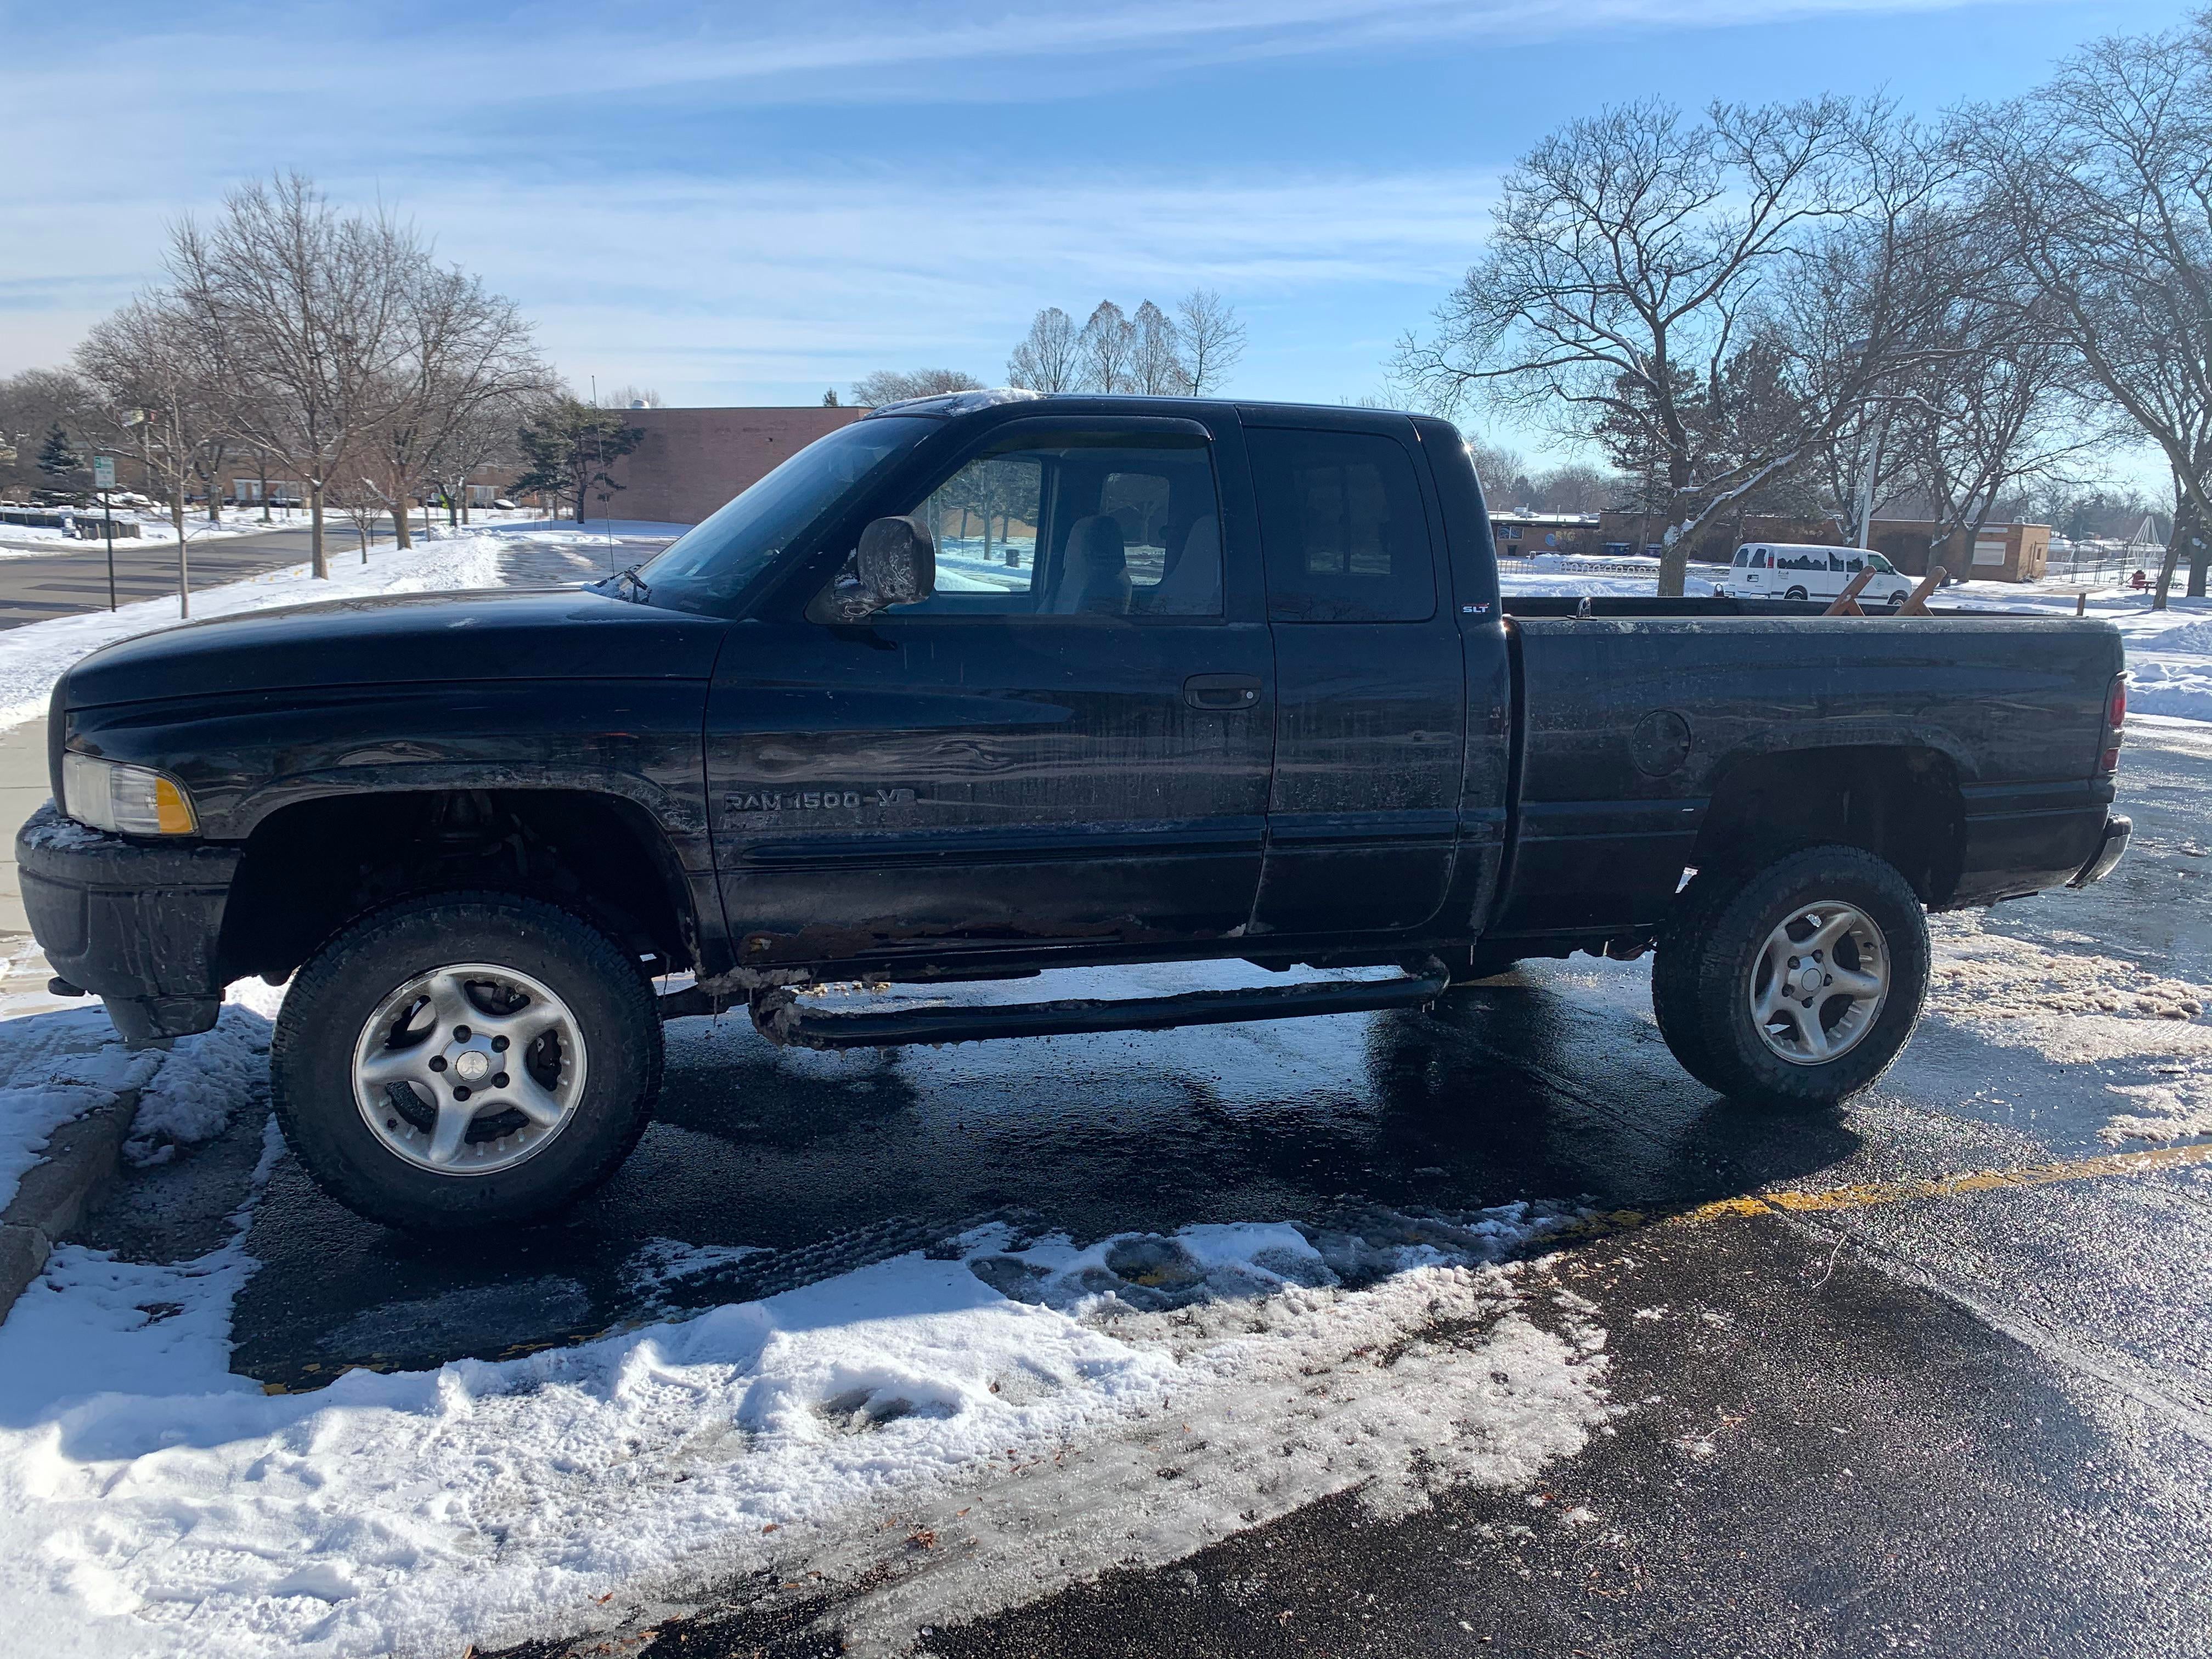 I got a 2000 Dodge Ram 1500 5.9l magnum 4wd I want to build it for off  roading. I saw a few options in my price range for a lift at 2.5,